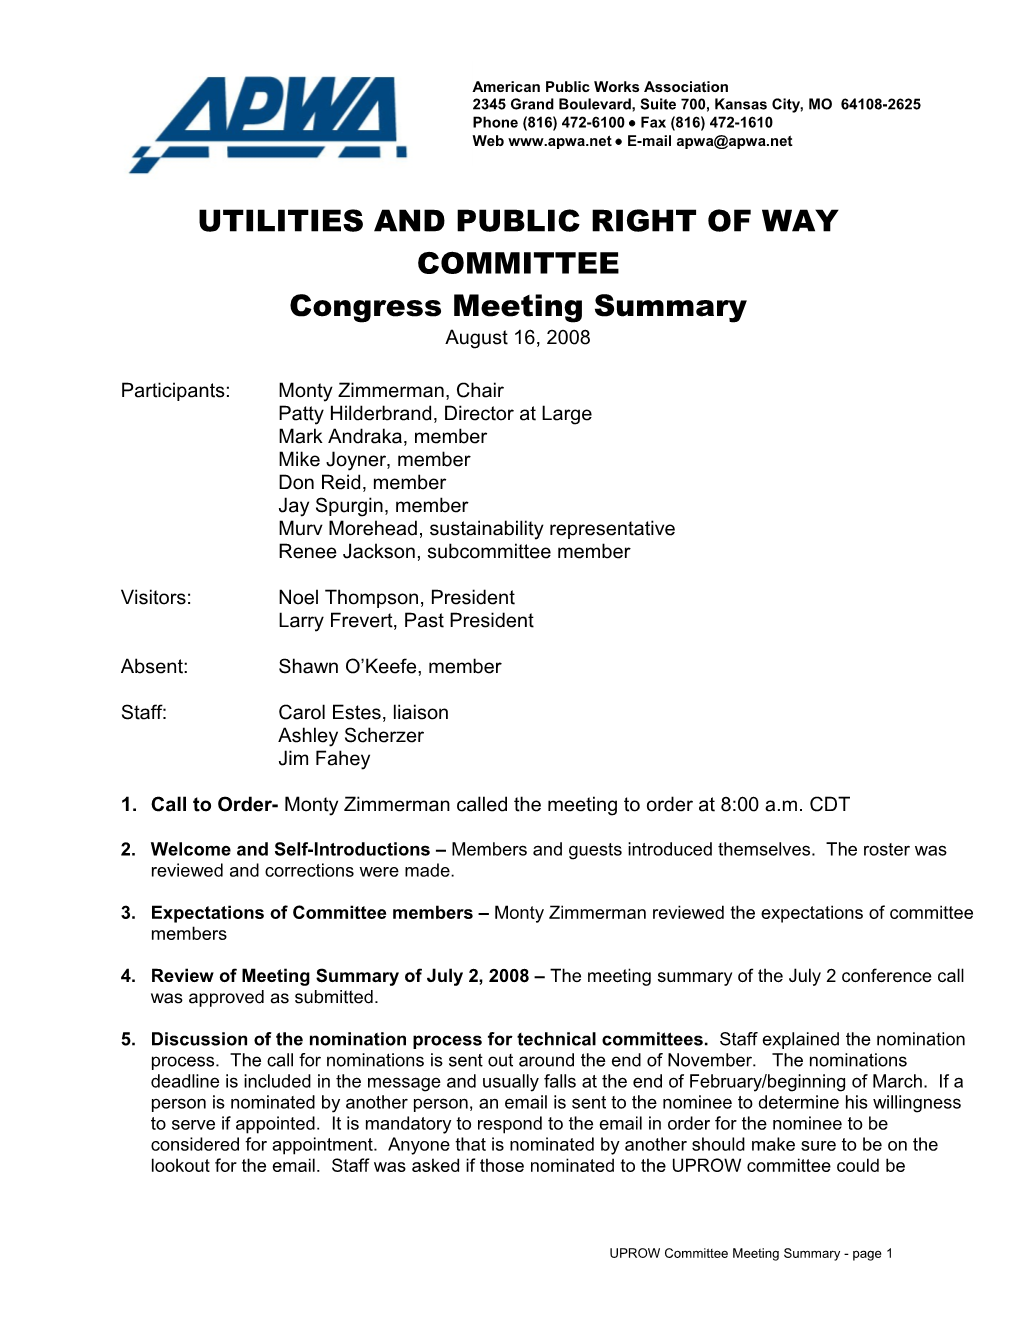 Utilities and Public Right of Way